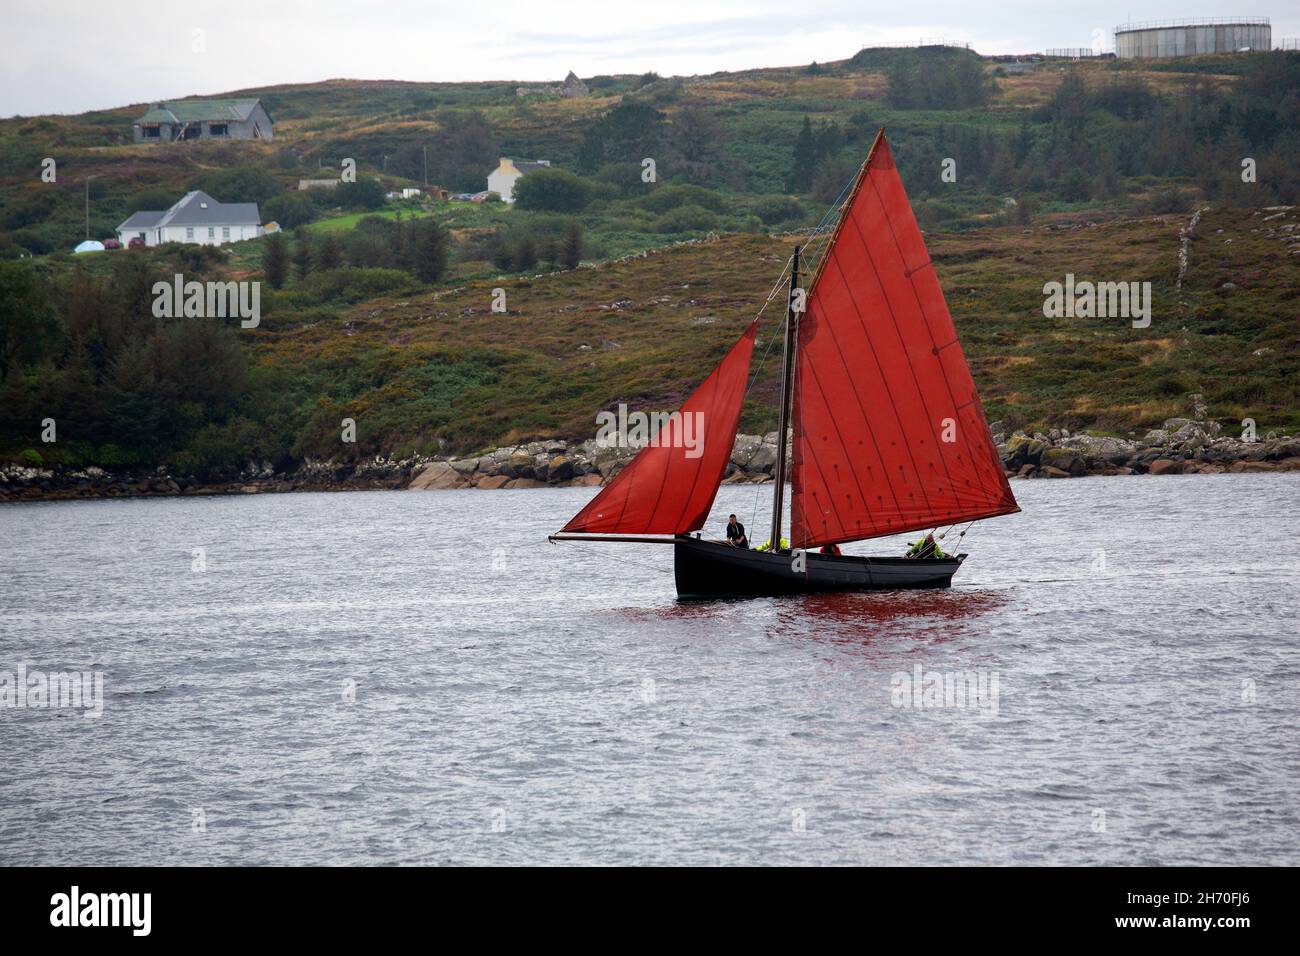 A Galway hooker in the waters off Connemara with its distinctive red saiils. Stock Photo